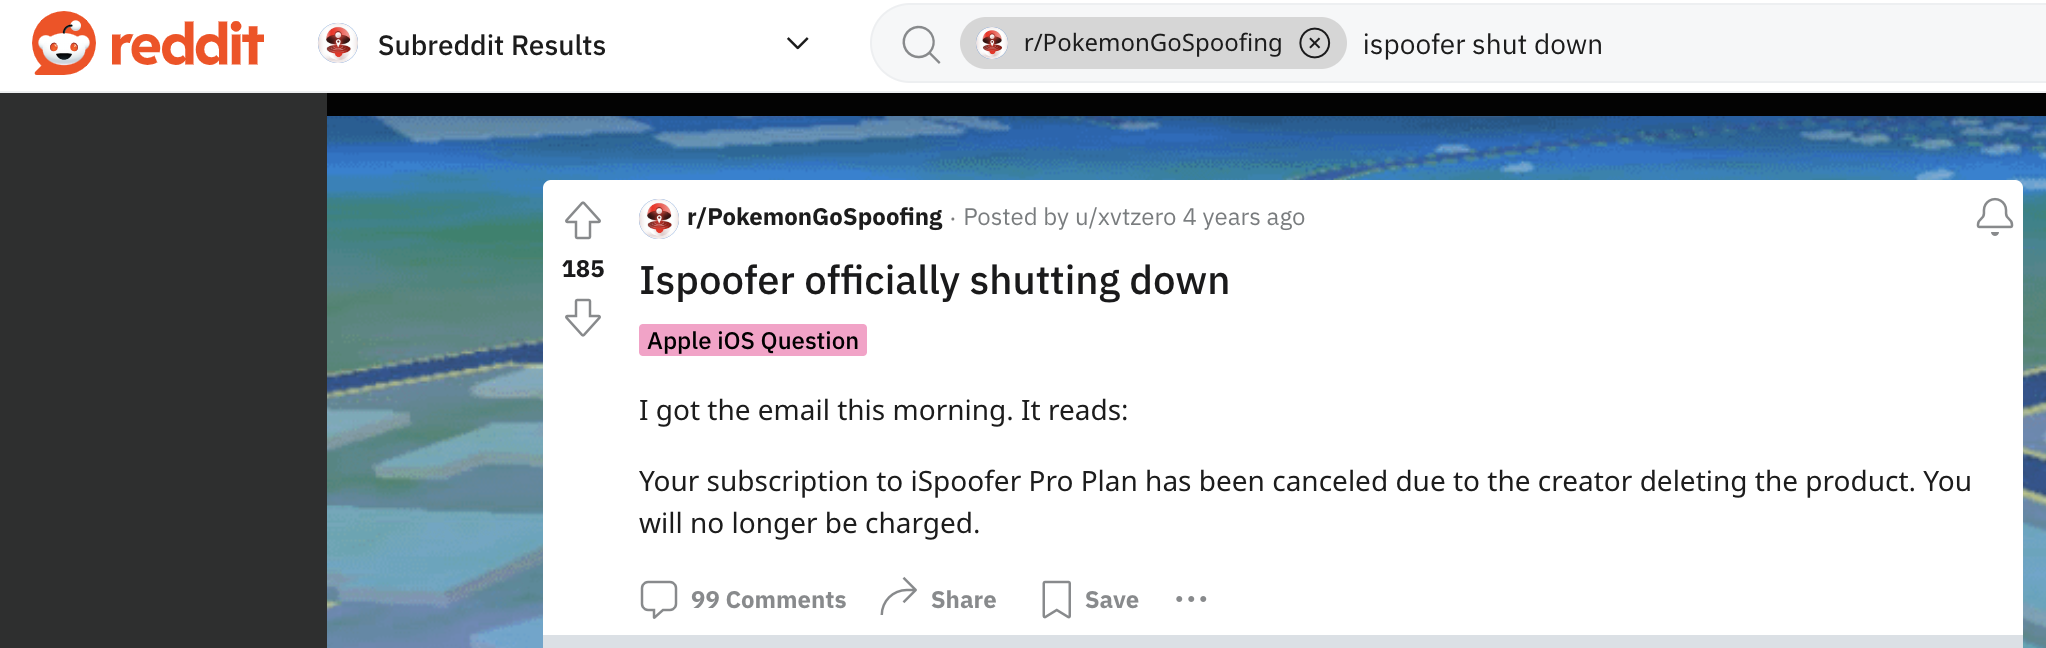 Reddit Ispoofer Shutting down Email Content